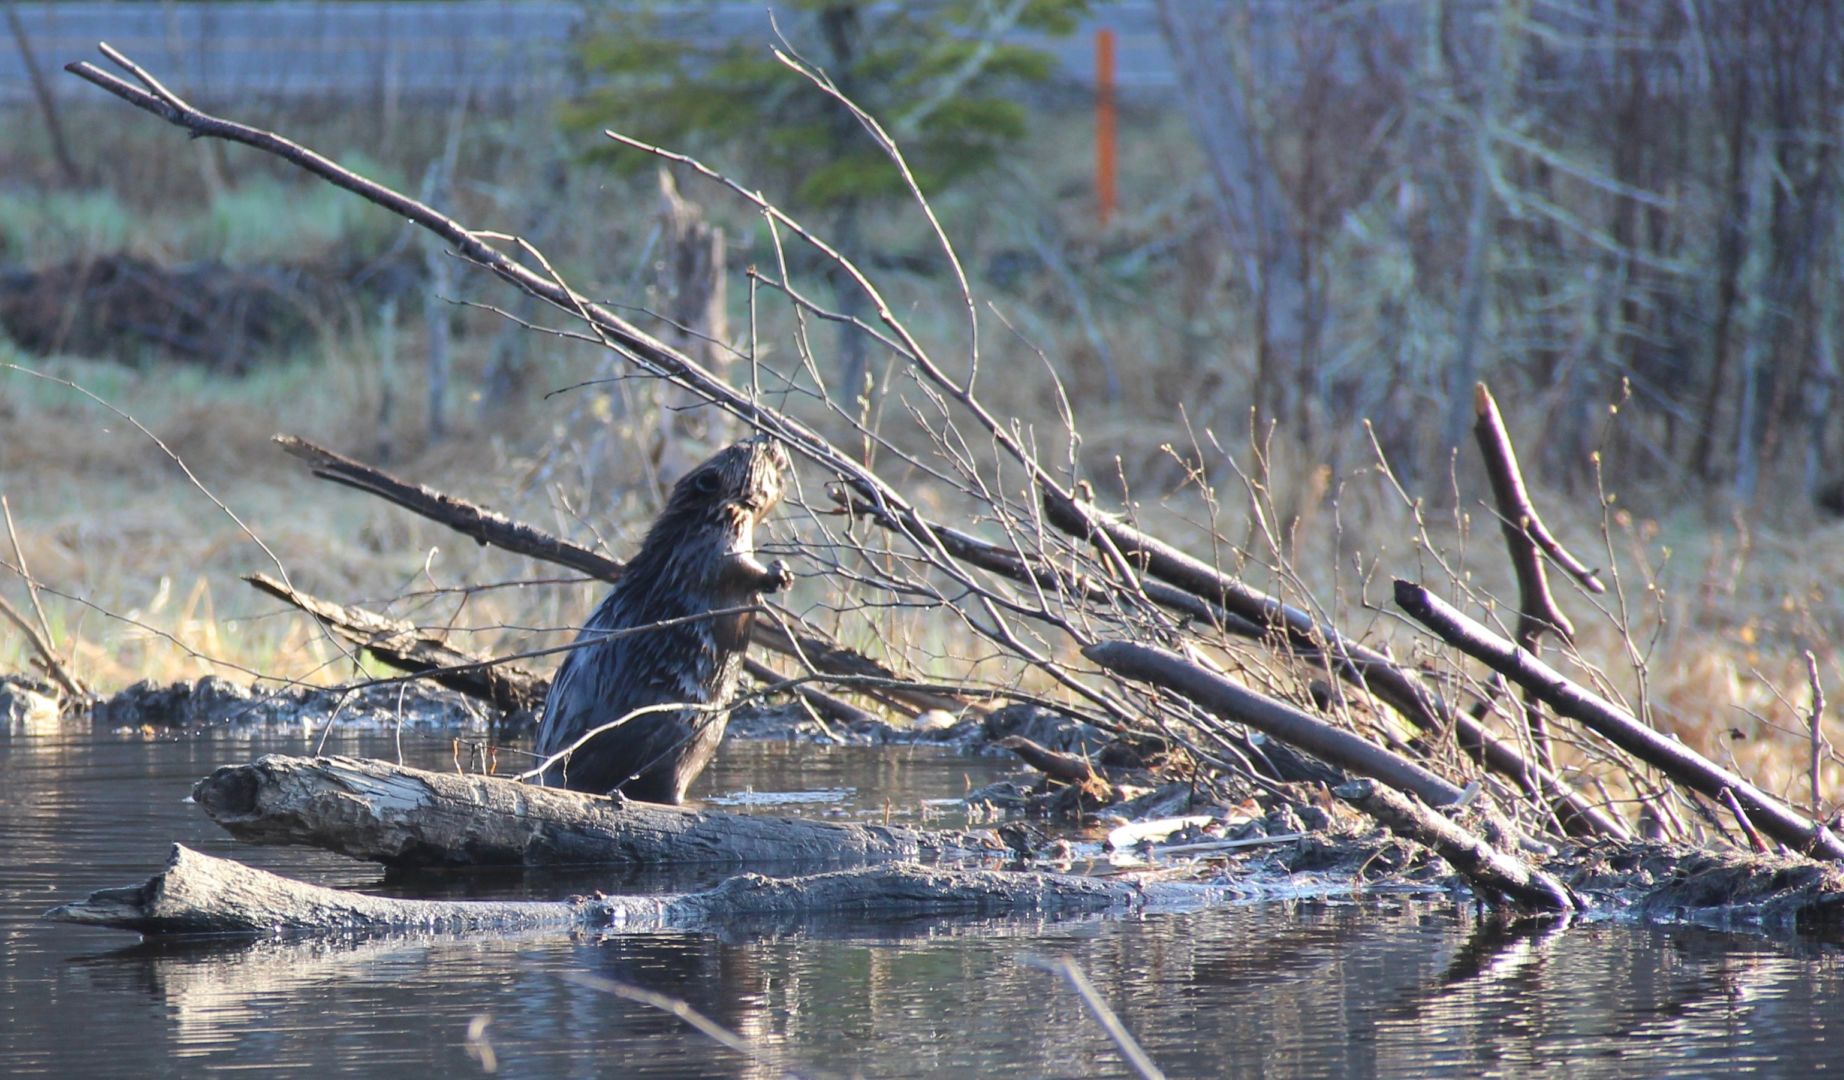 A beaver stands on their beaver dam in the wilderness.